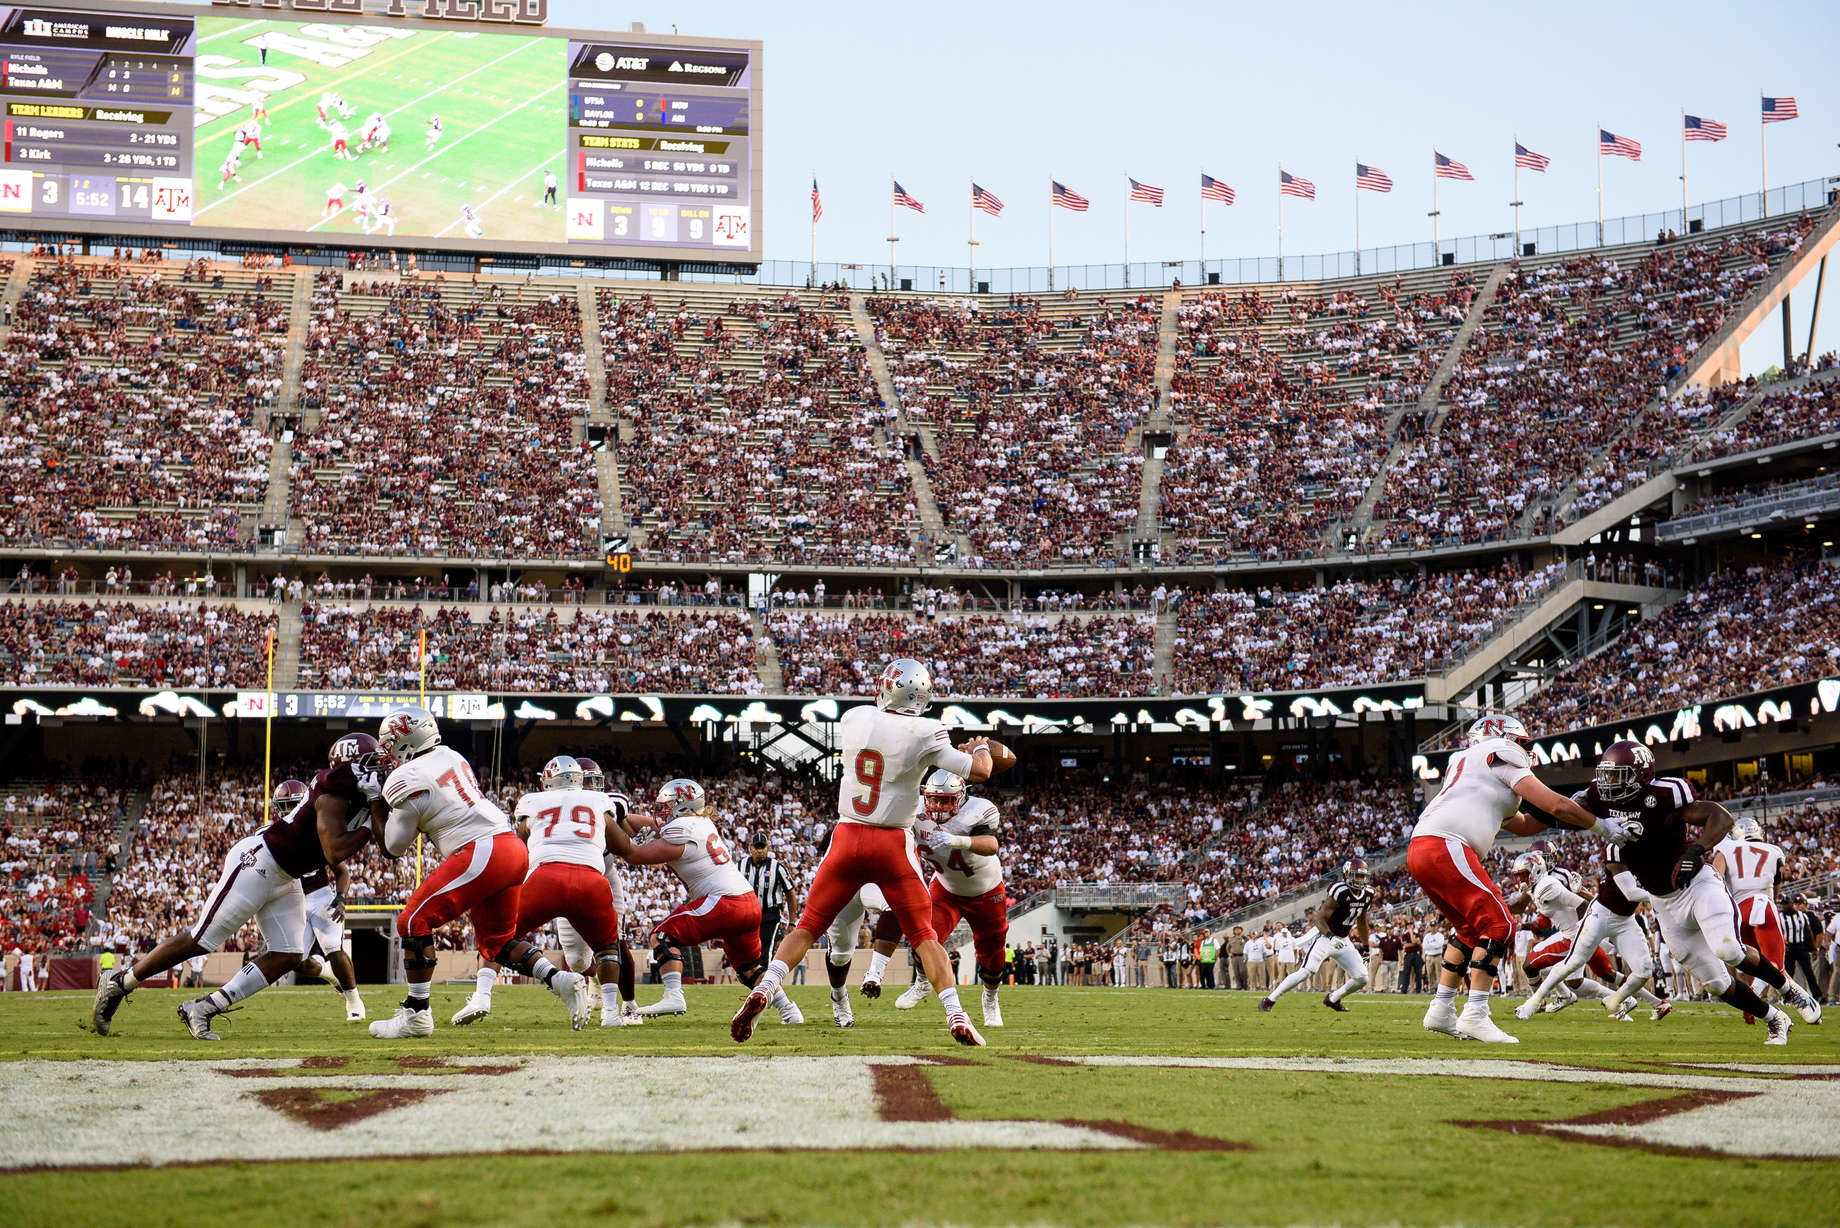 Best College Football Stadiums In America Ranked The Top